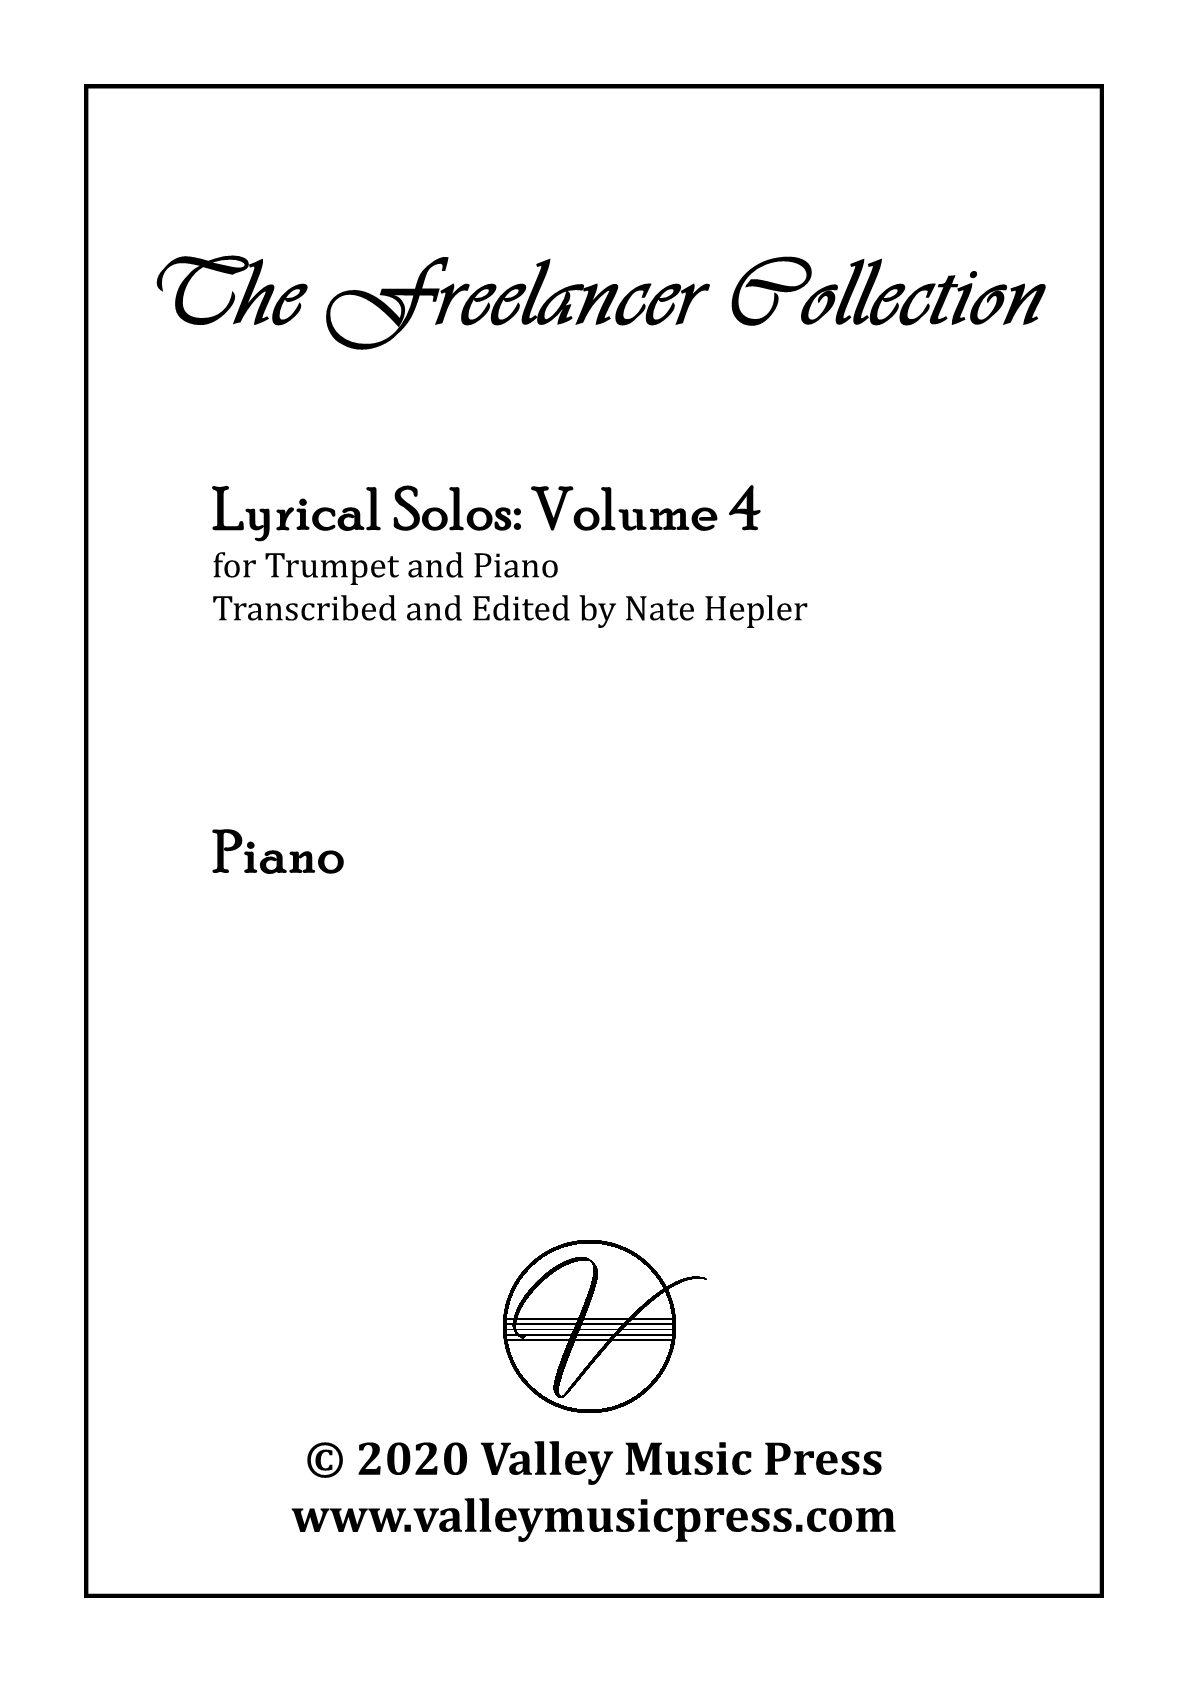 Hepler - Freelancer Collection Lyrical Solos Vol 4 (Trp & Piano) - Click Image to Close